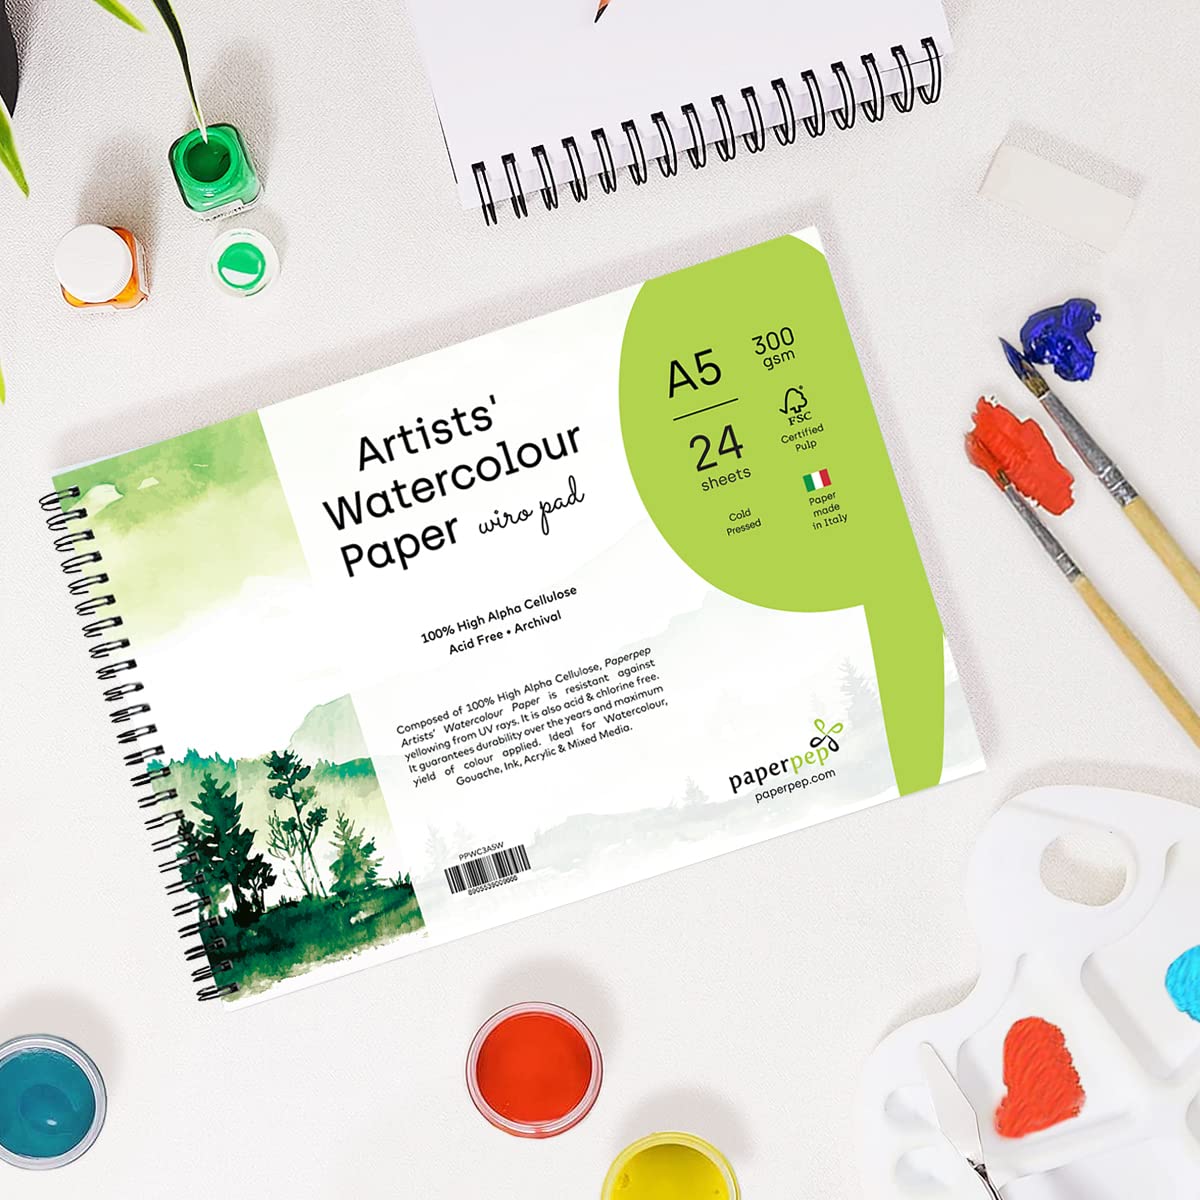 PaperPep Artists' Watercolour Wiro Pads 300GSM Cold Pressed A5 24 Sheets